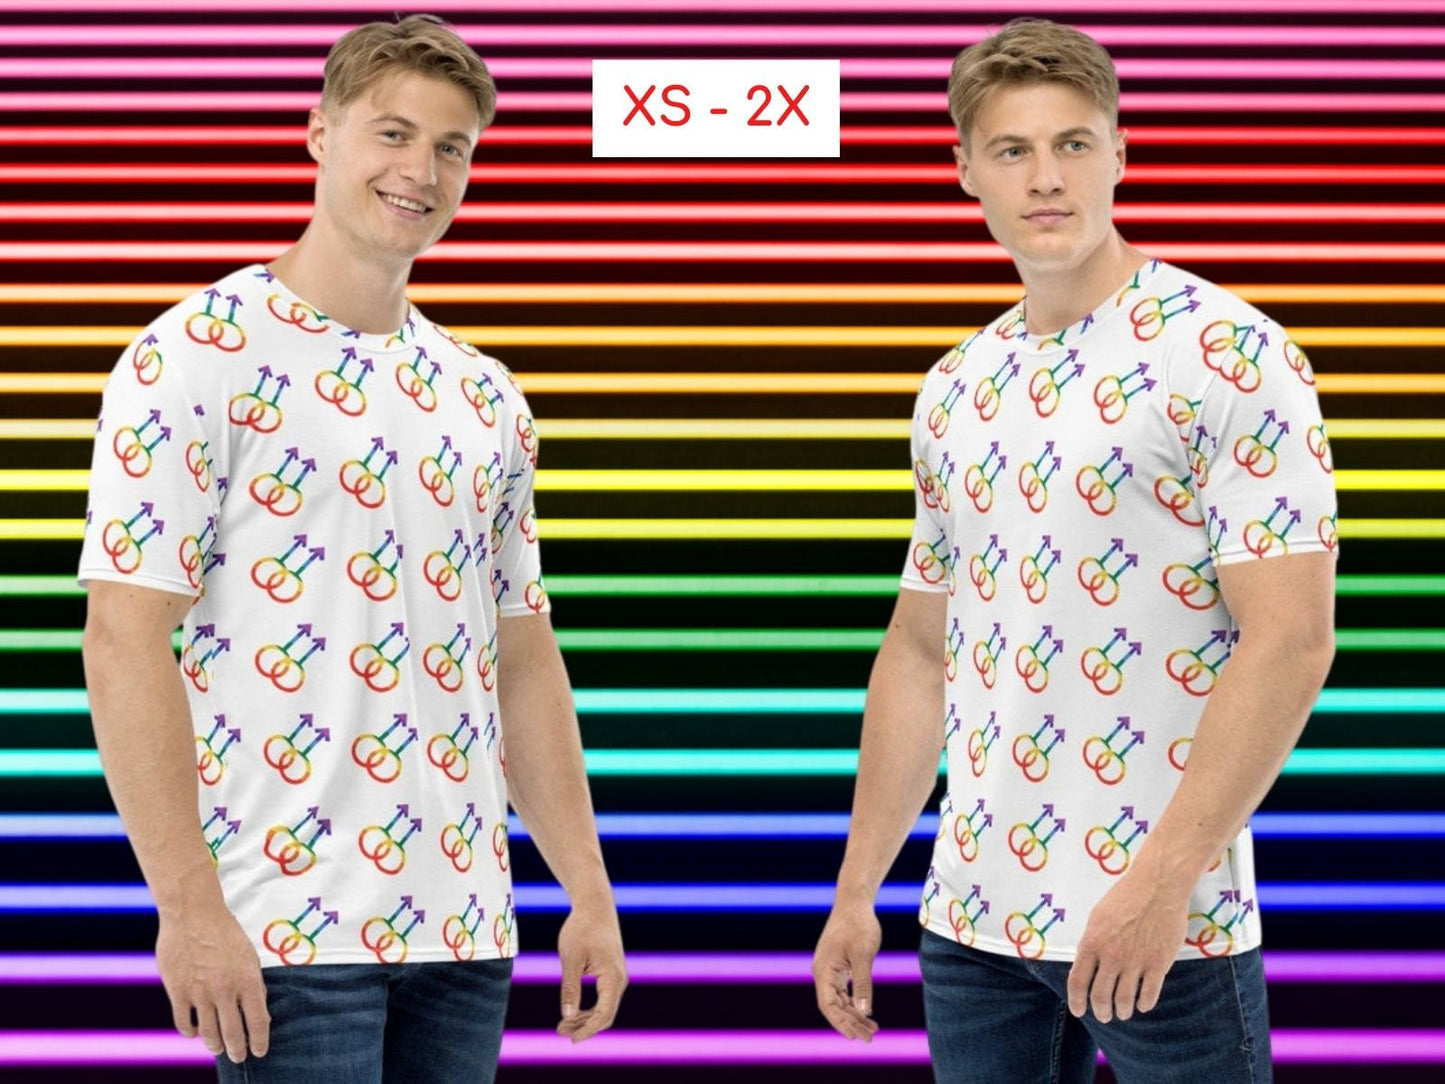 LGBT Pride Month Men's White or Black T-Shirt Gender Equality Symbol Colorful Activewear Sports Casual Outfit Rainbow Colors Parade Shirt